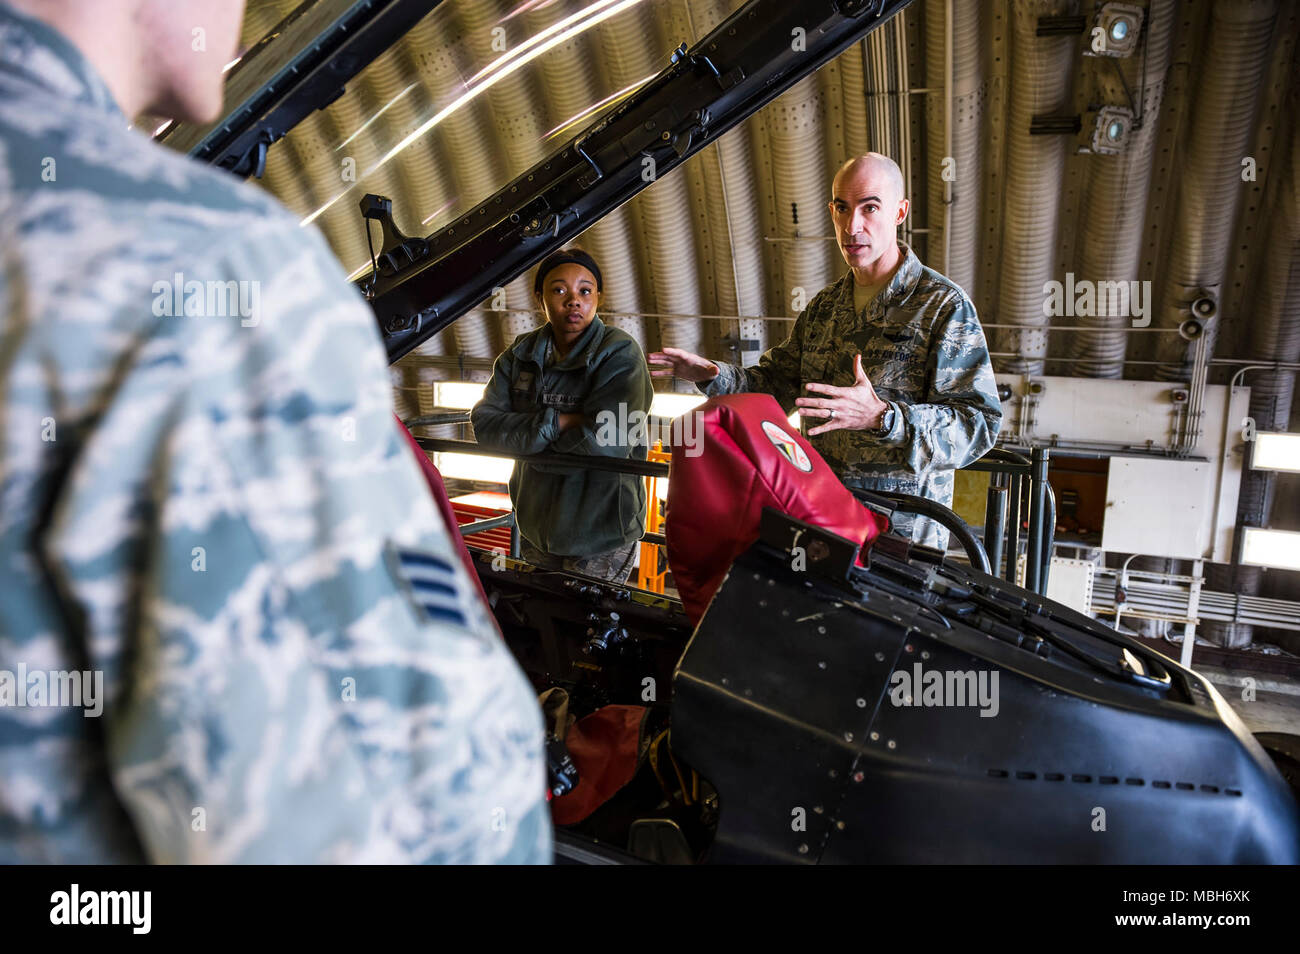 U.S. Air Force Col. Jason Bailey, 52nd Fighter Wing commander, educates Airman 1st Class Leah Crawford, 52nd Logistics Readiness Squadron fleet management analyst journeyman, and others about the different capabilities of an F-16 Fighting Falcon at Spangdahlem Air Base, Germany, April 4, 2018. Bailey explained the functions and capabilities of the aircraft as an opportunity to expand their knowledge of the flying mission at Spangdahlem. Stock Photo